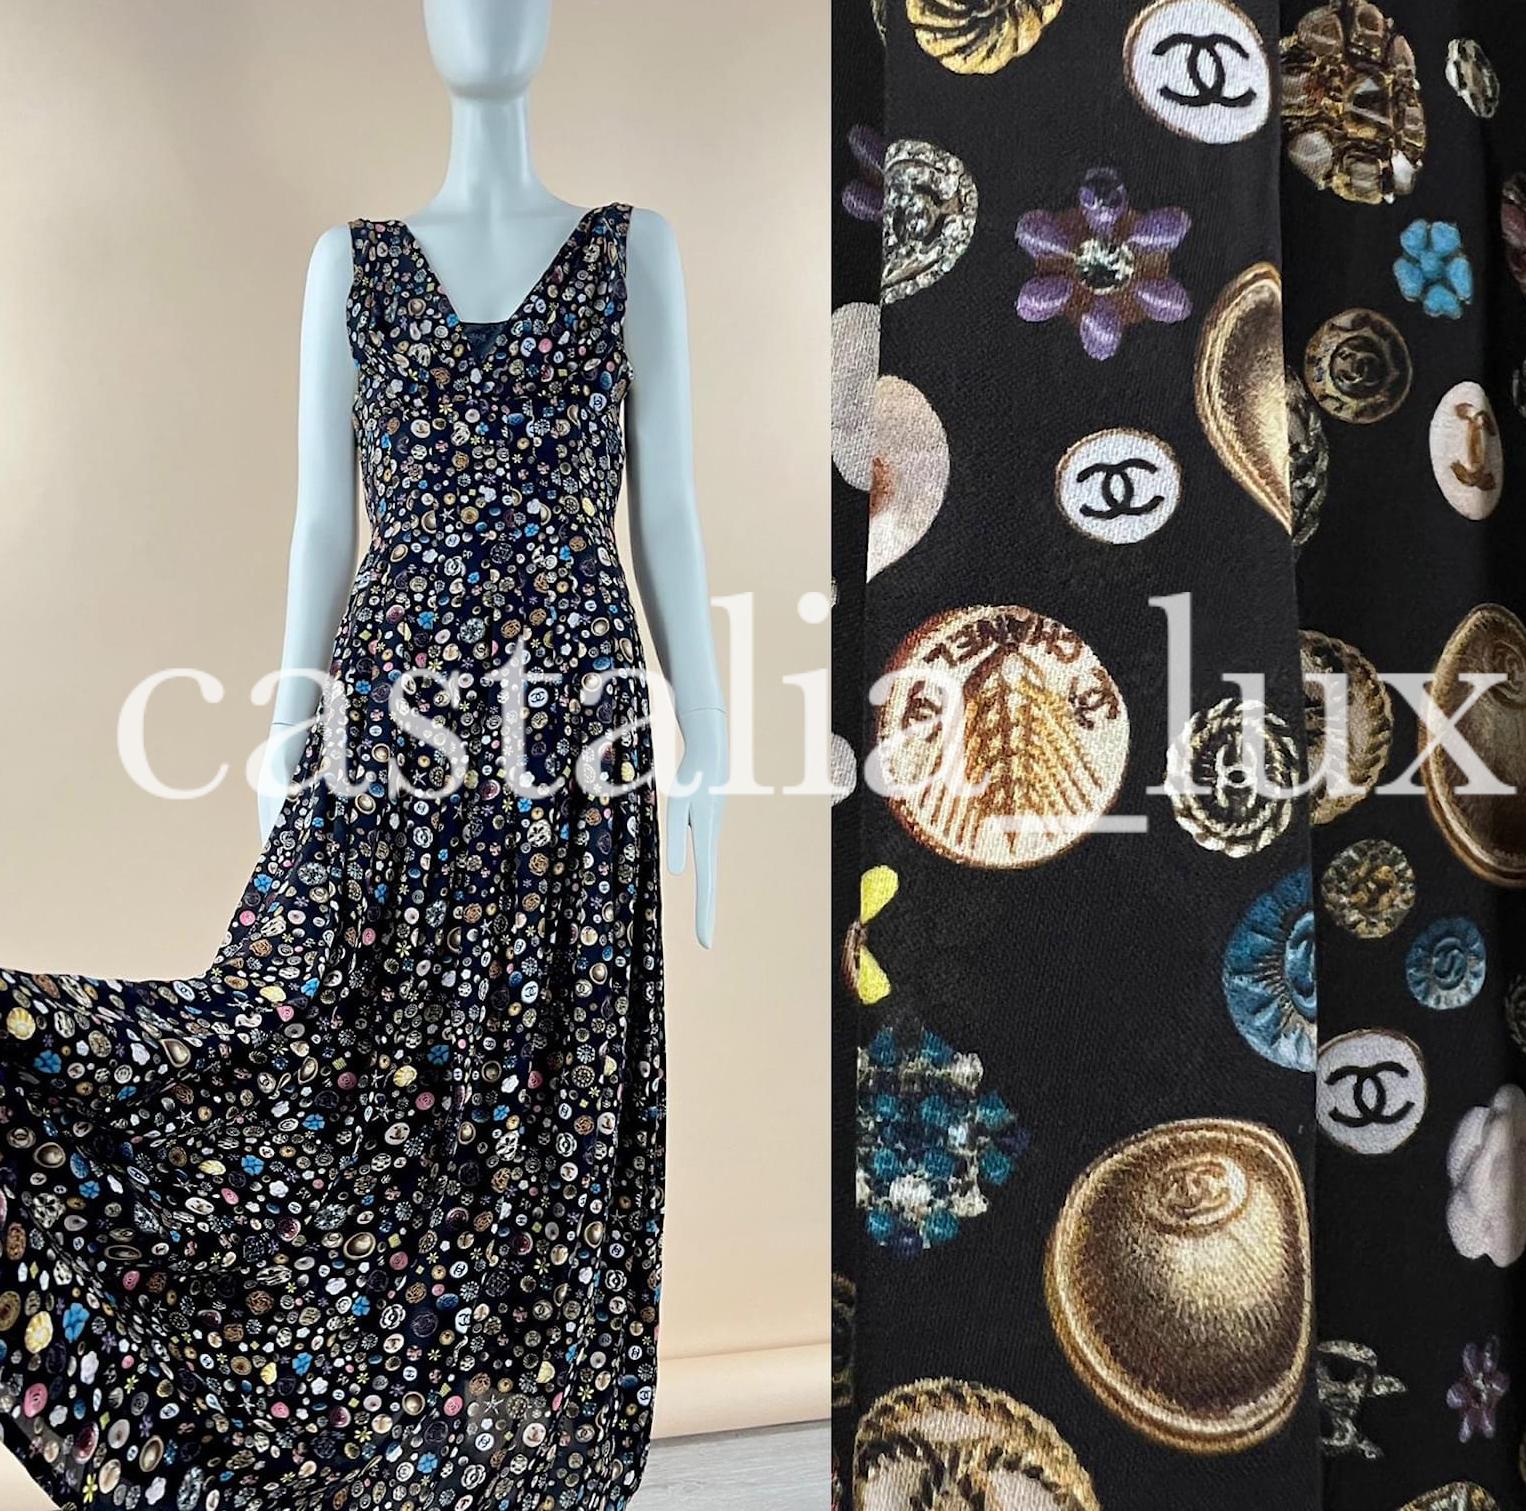 Stunning Chanel black silk maxi dress wit CC logo print. Retail price over 11,000 $ !
- insets of lamskin leather
- CC logo buttons
Size mark 34 fr. looks just magnificent!
Condition is pristine, only tried once, no signs of wear.